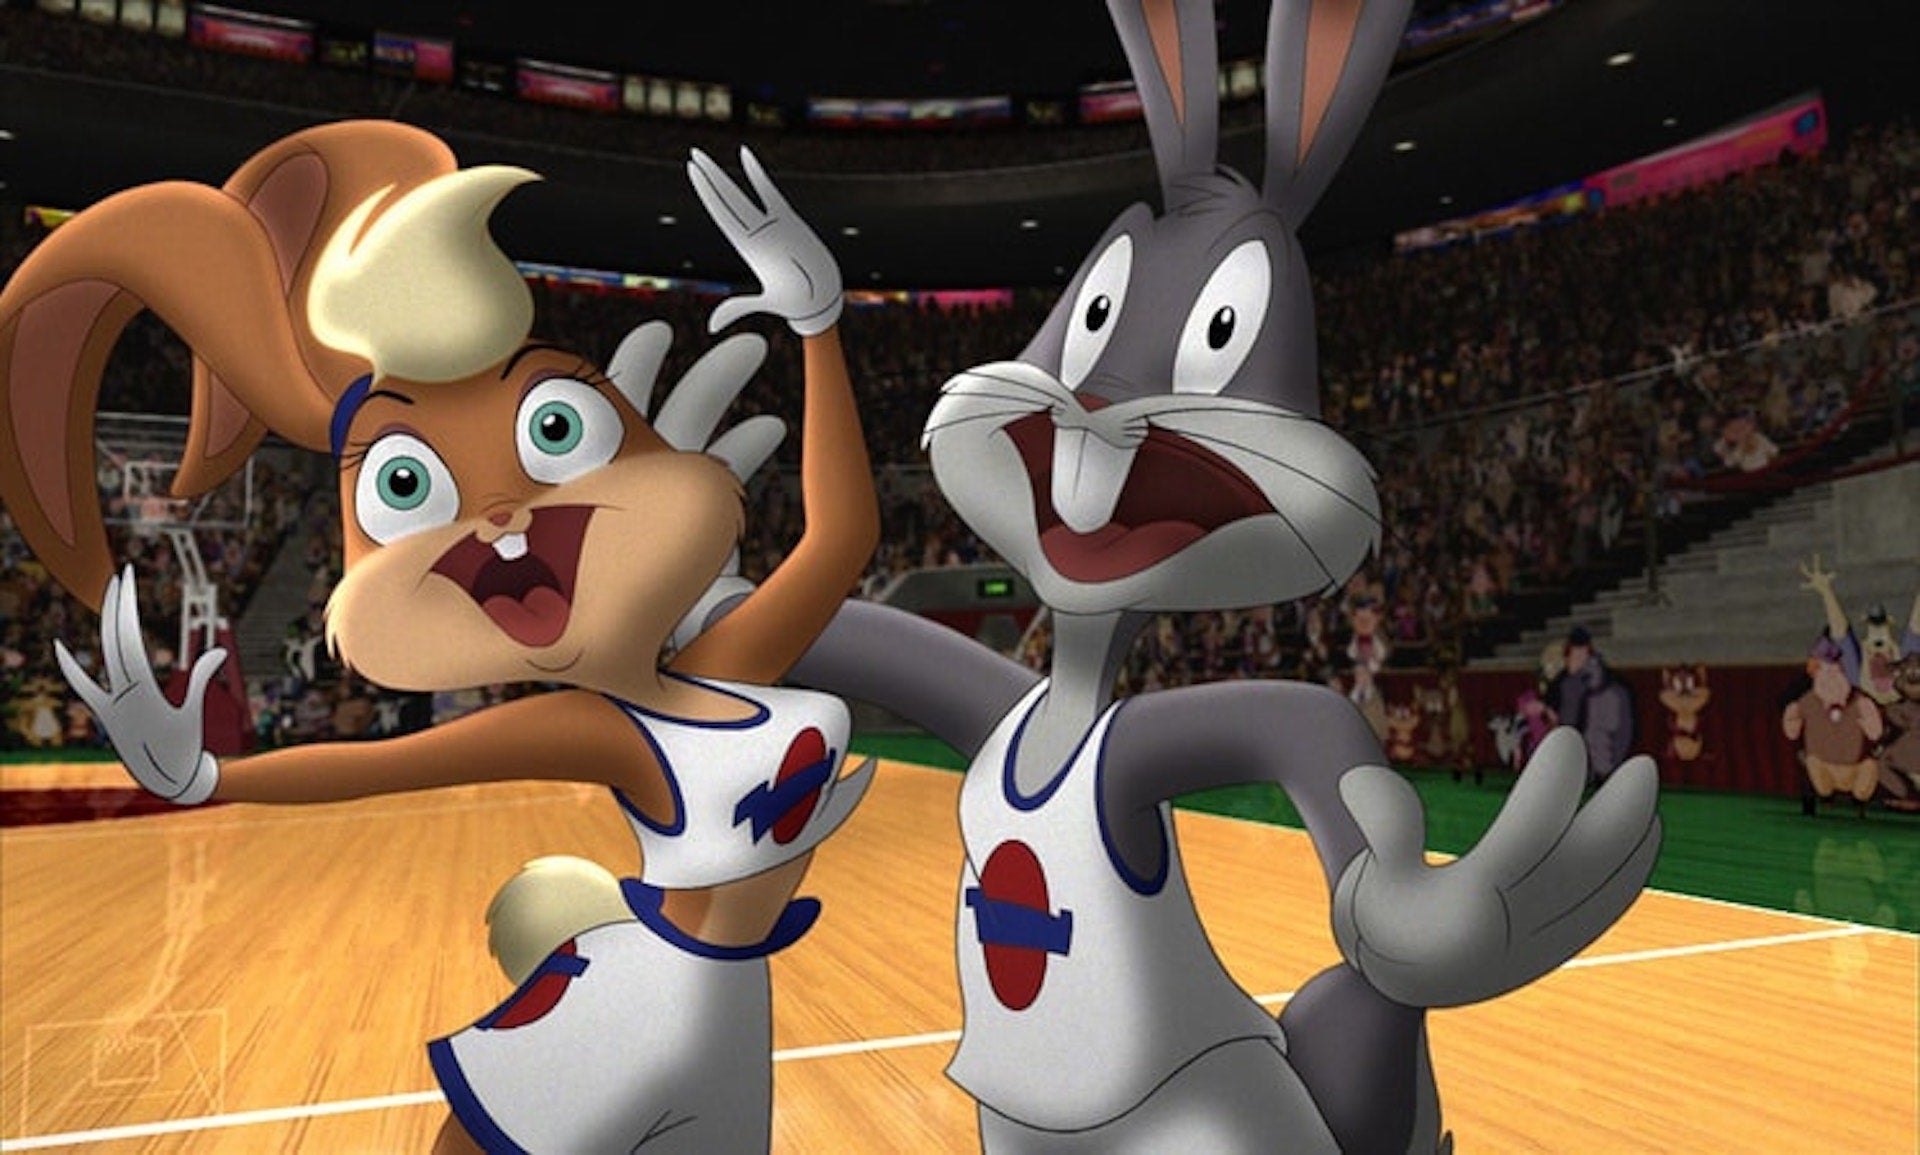 Space Jam 2s Lola Bunny, Pepé Le Pew The sexy cartoon character wont be sexy anymore in the new movie image